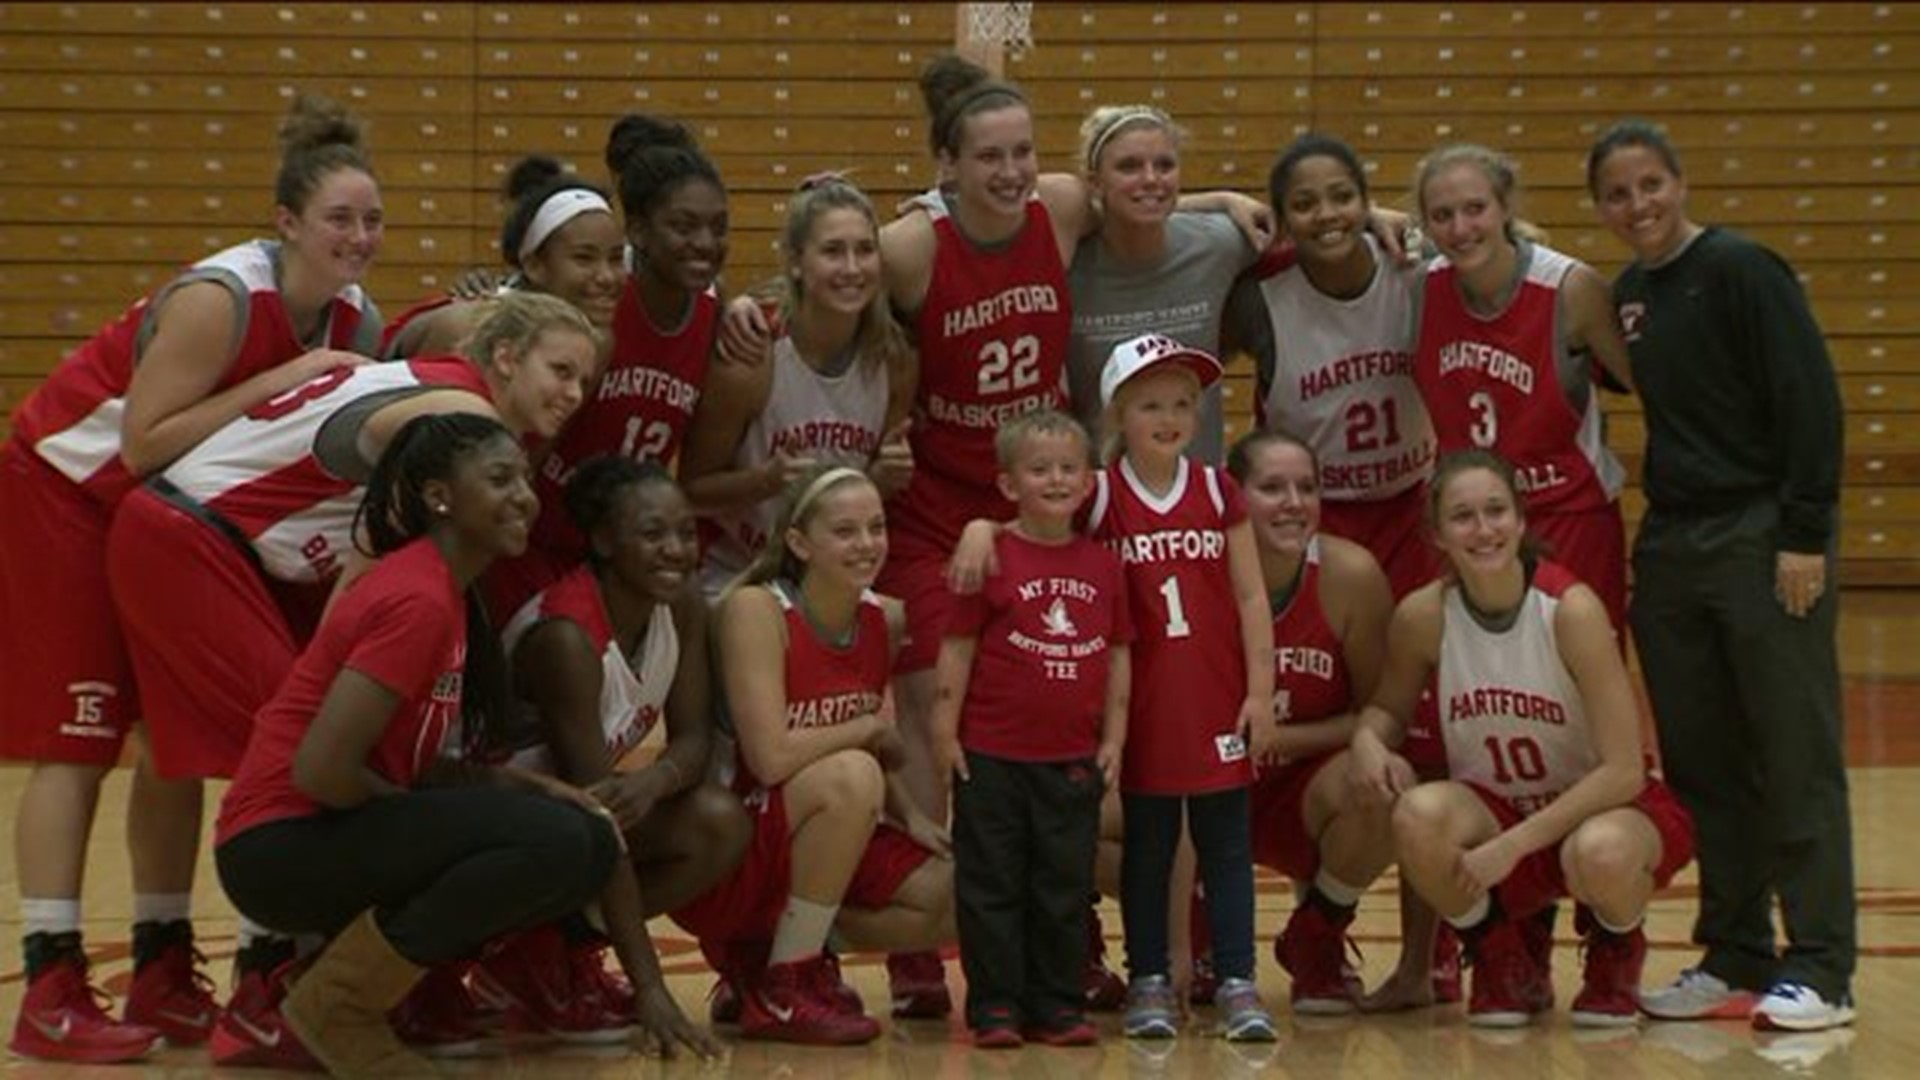 Six Year Old Zoe Brown Joins the UHart Women`s Basketball Team